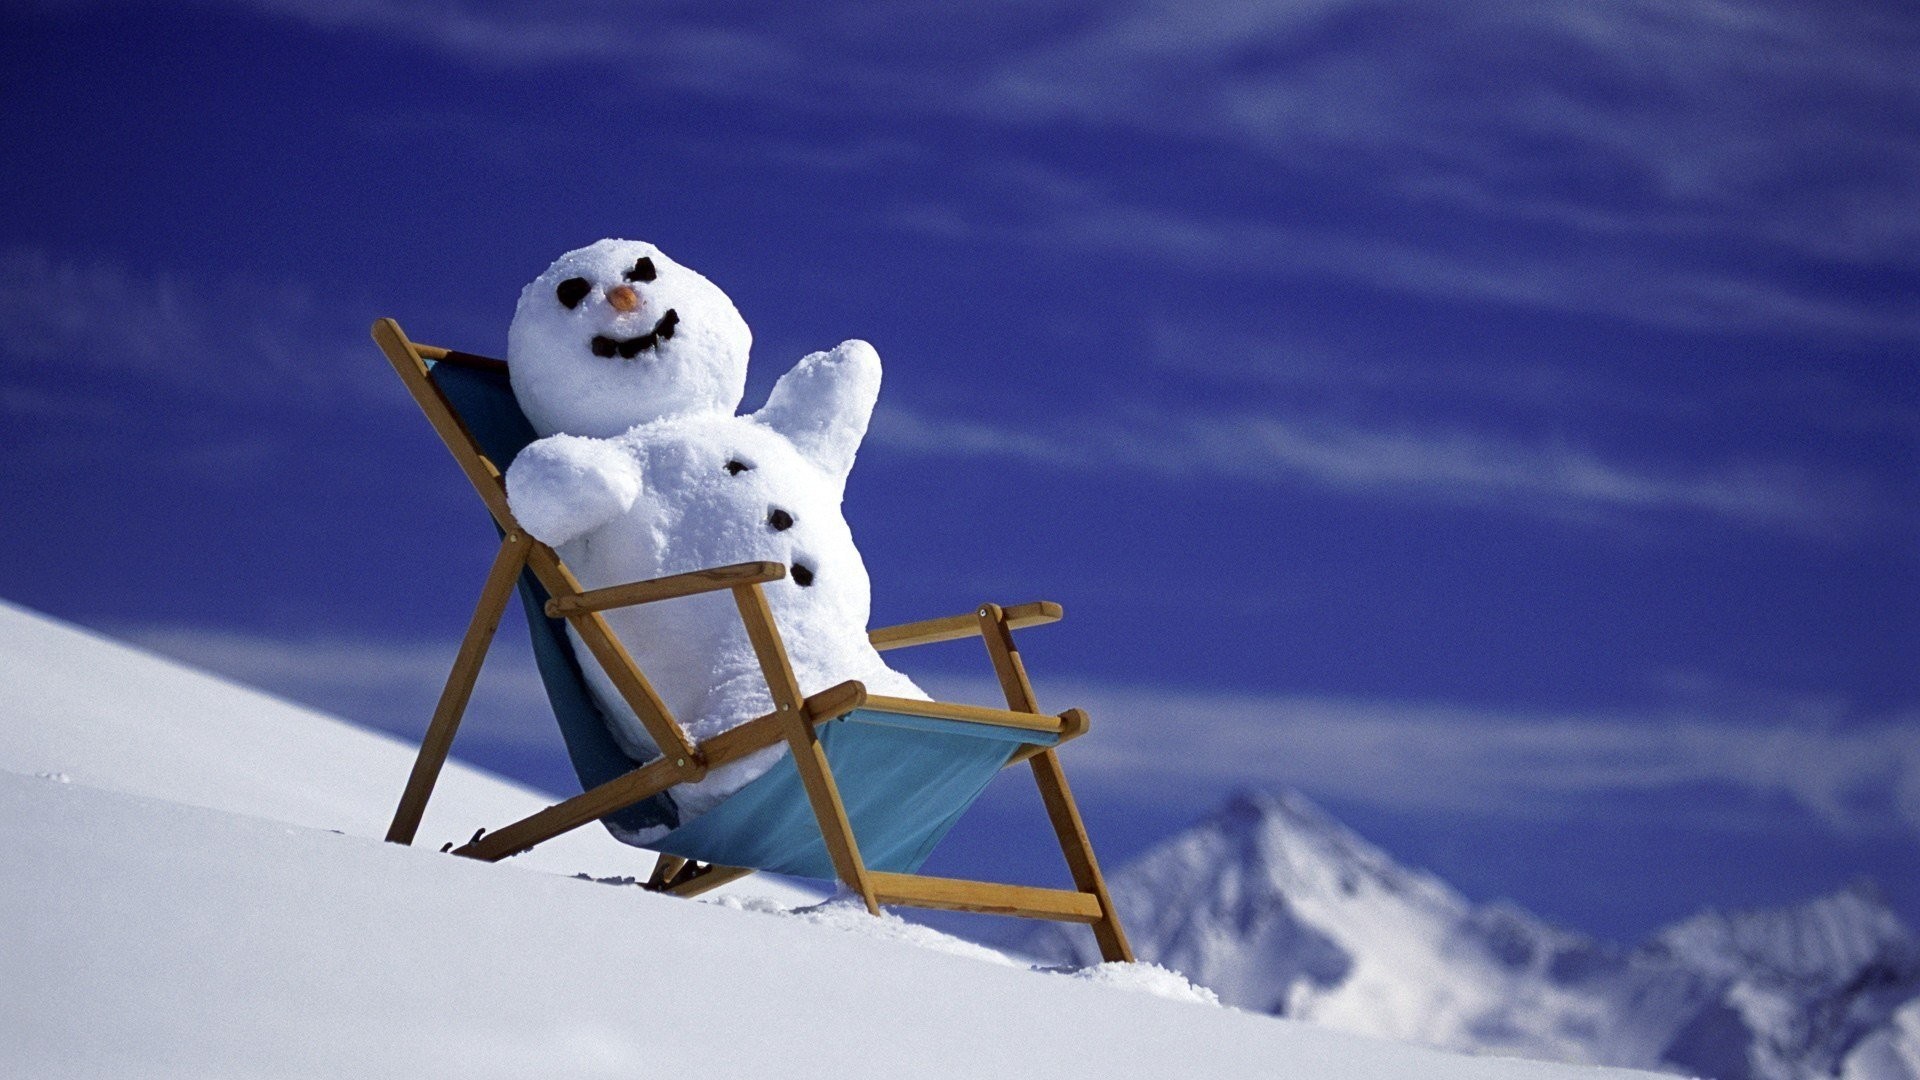 1920x1080 download funny winter wallpaper which is under the winter wallpapers .